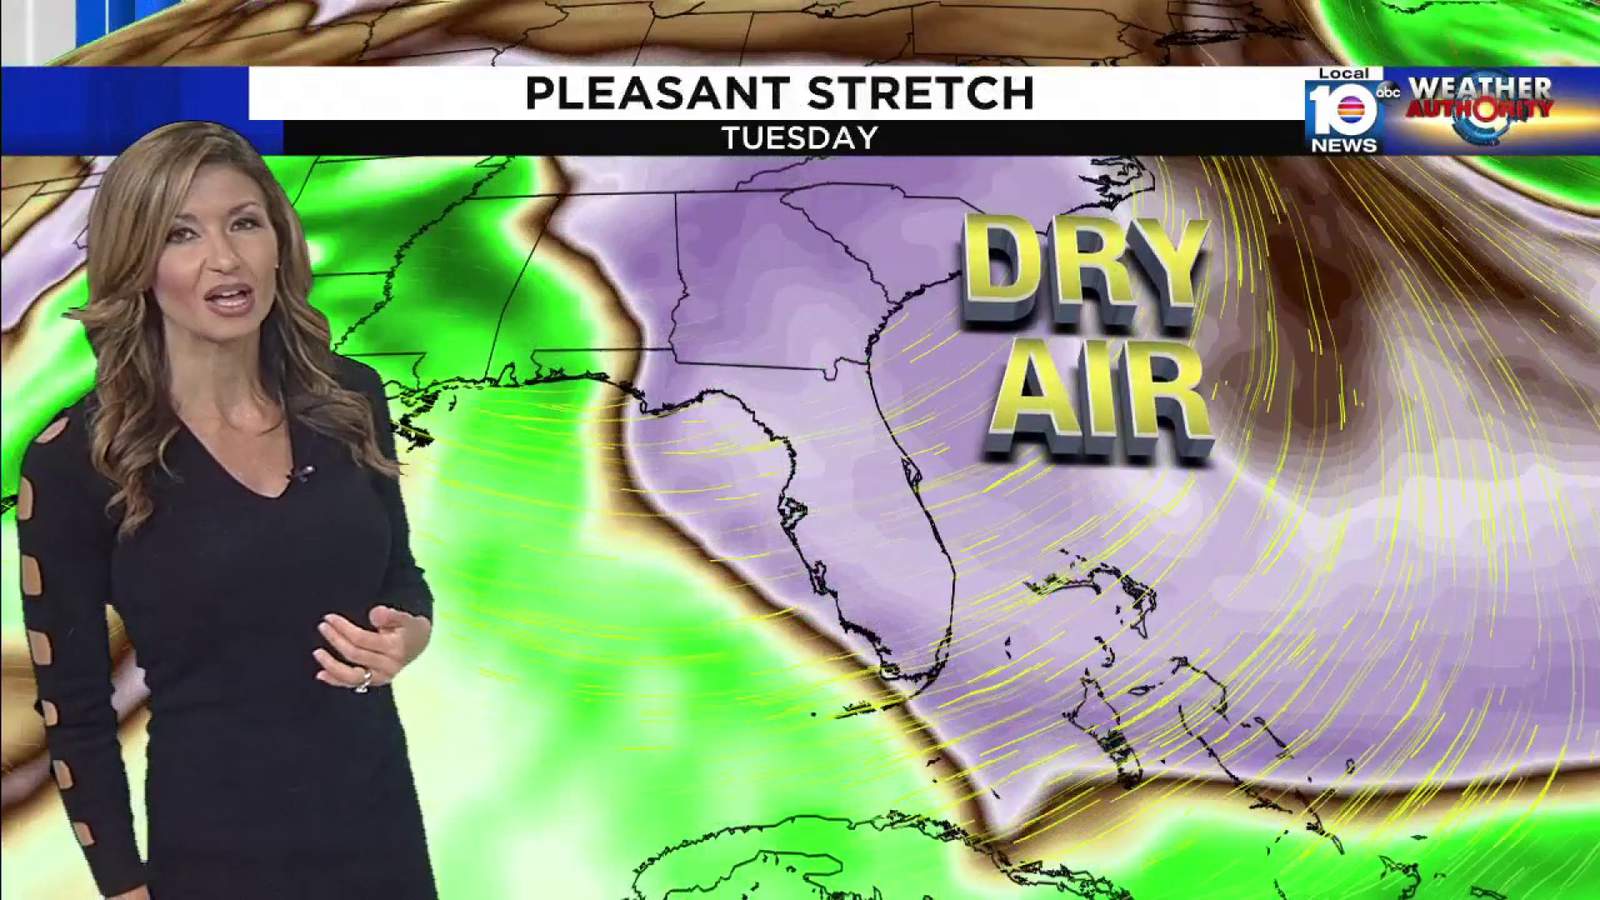 Feels like fall! Cooler, dry air in South Florida forecast